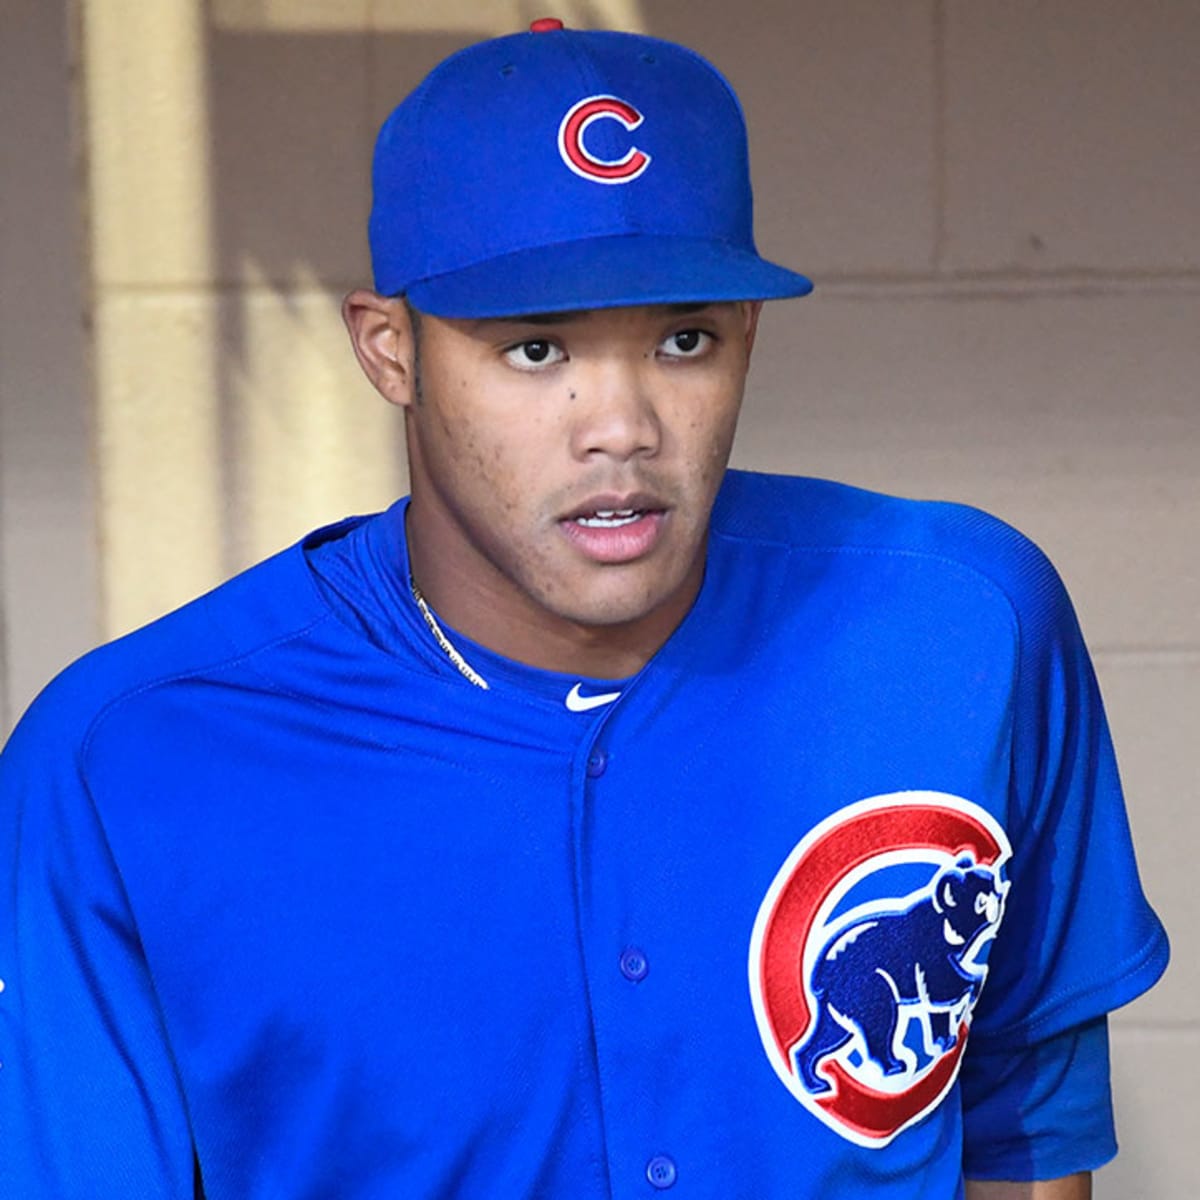 Addison Russell signs pre-arbitration contract with Cubs